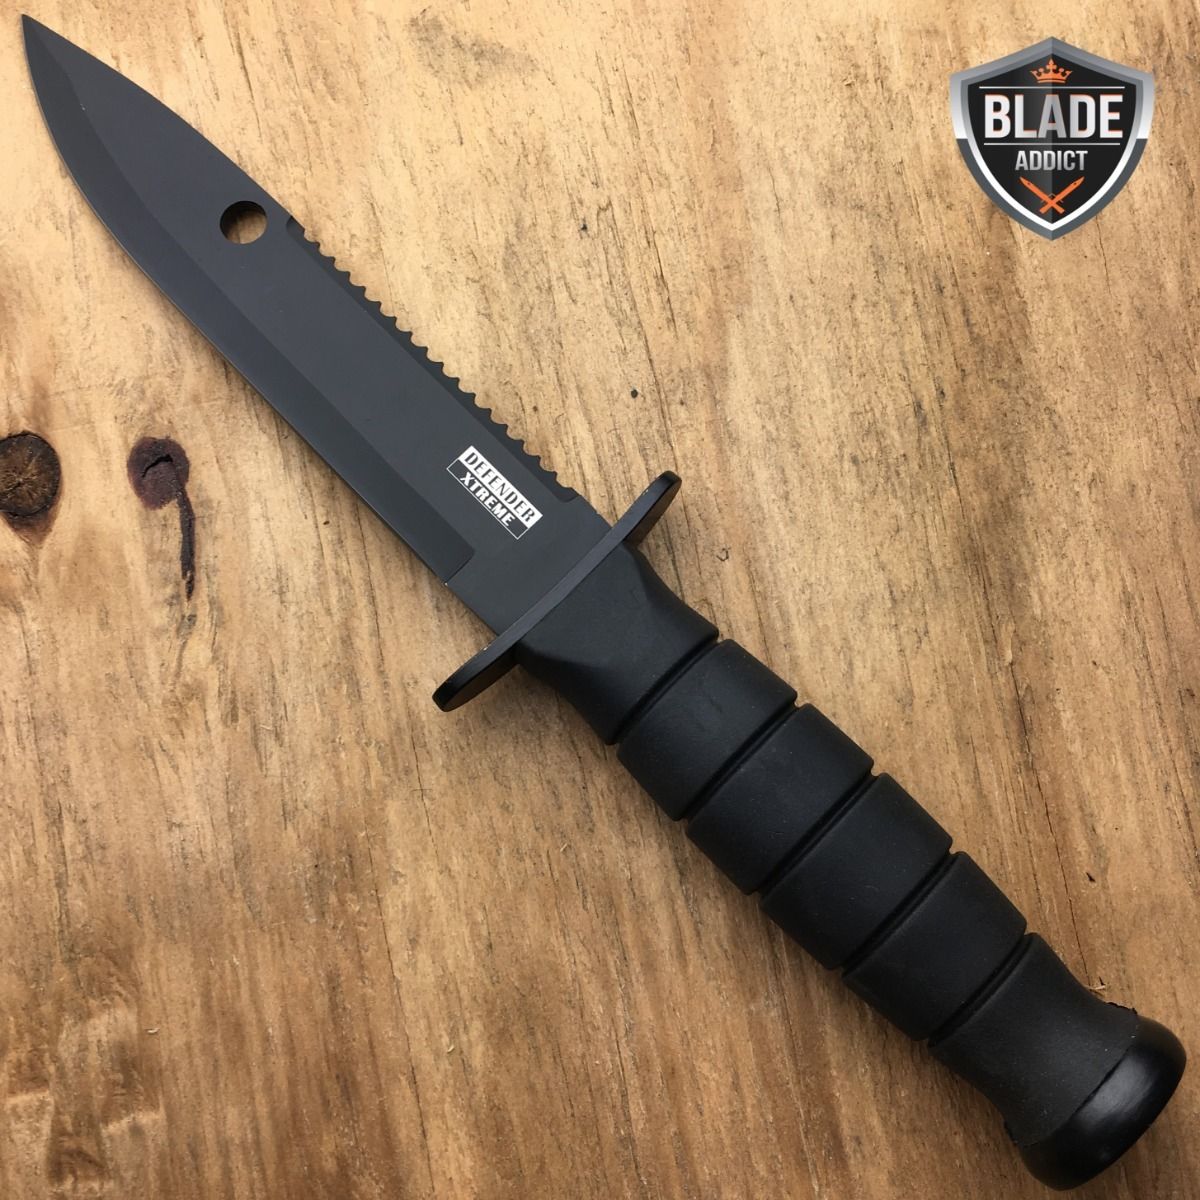 10.5" Fixed Blade Tactical Hunting Survival Knife w Sheath Bowie